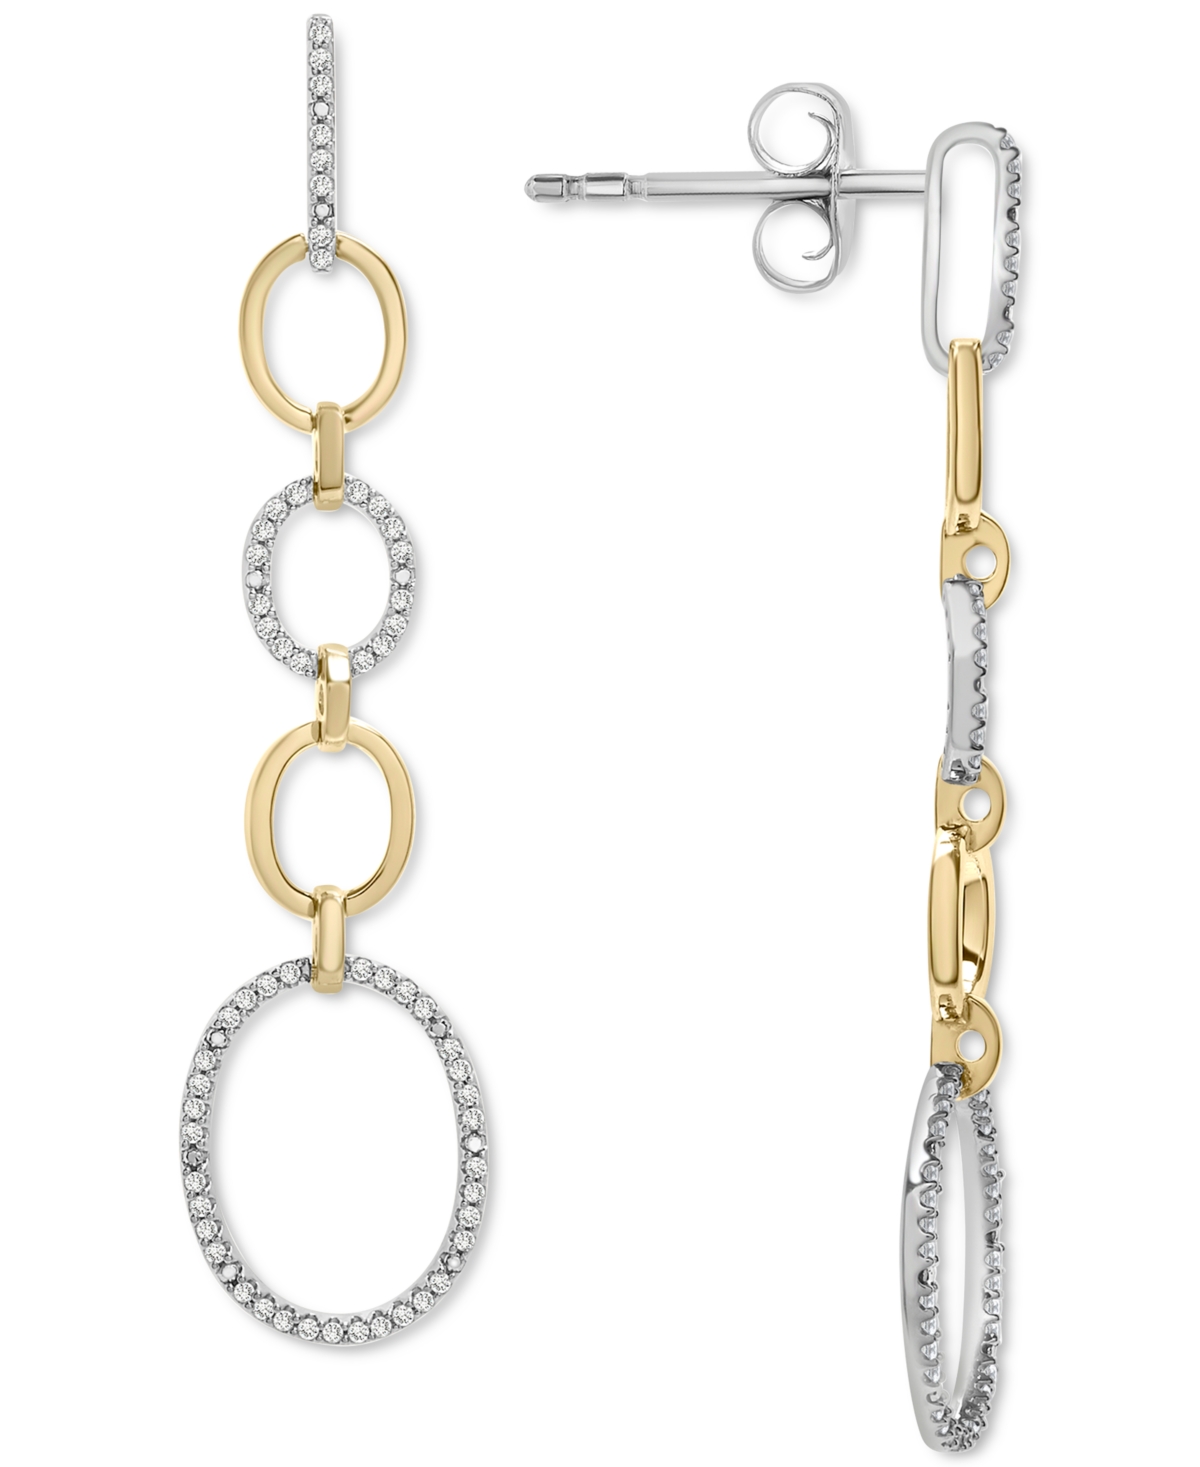 Diamond Oval Link Drop Earrings (1 ct. t.w.) in 14k Gold-Plated Sterling Silver, Created for Macy's - Gold-Plated Sterling Silver